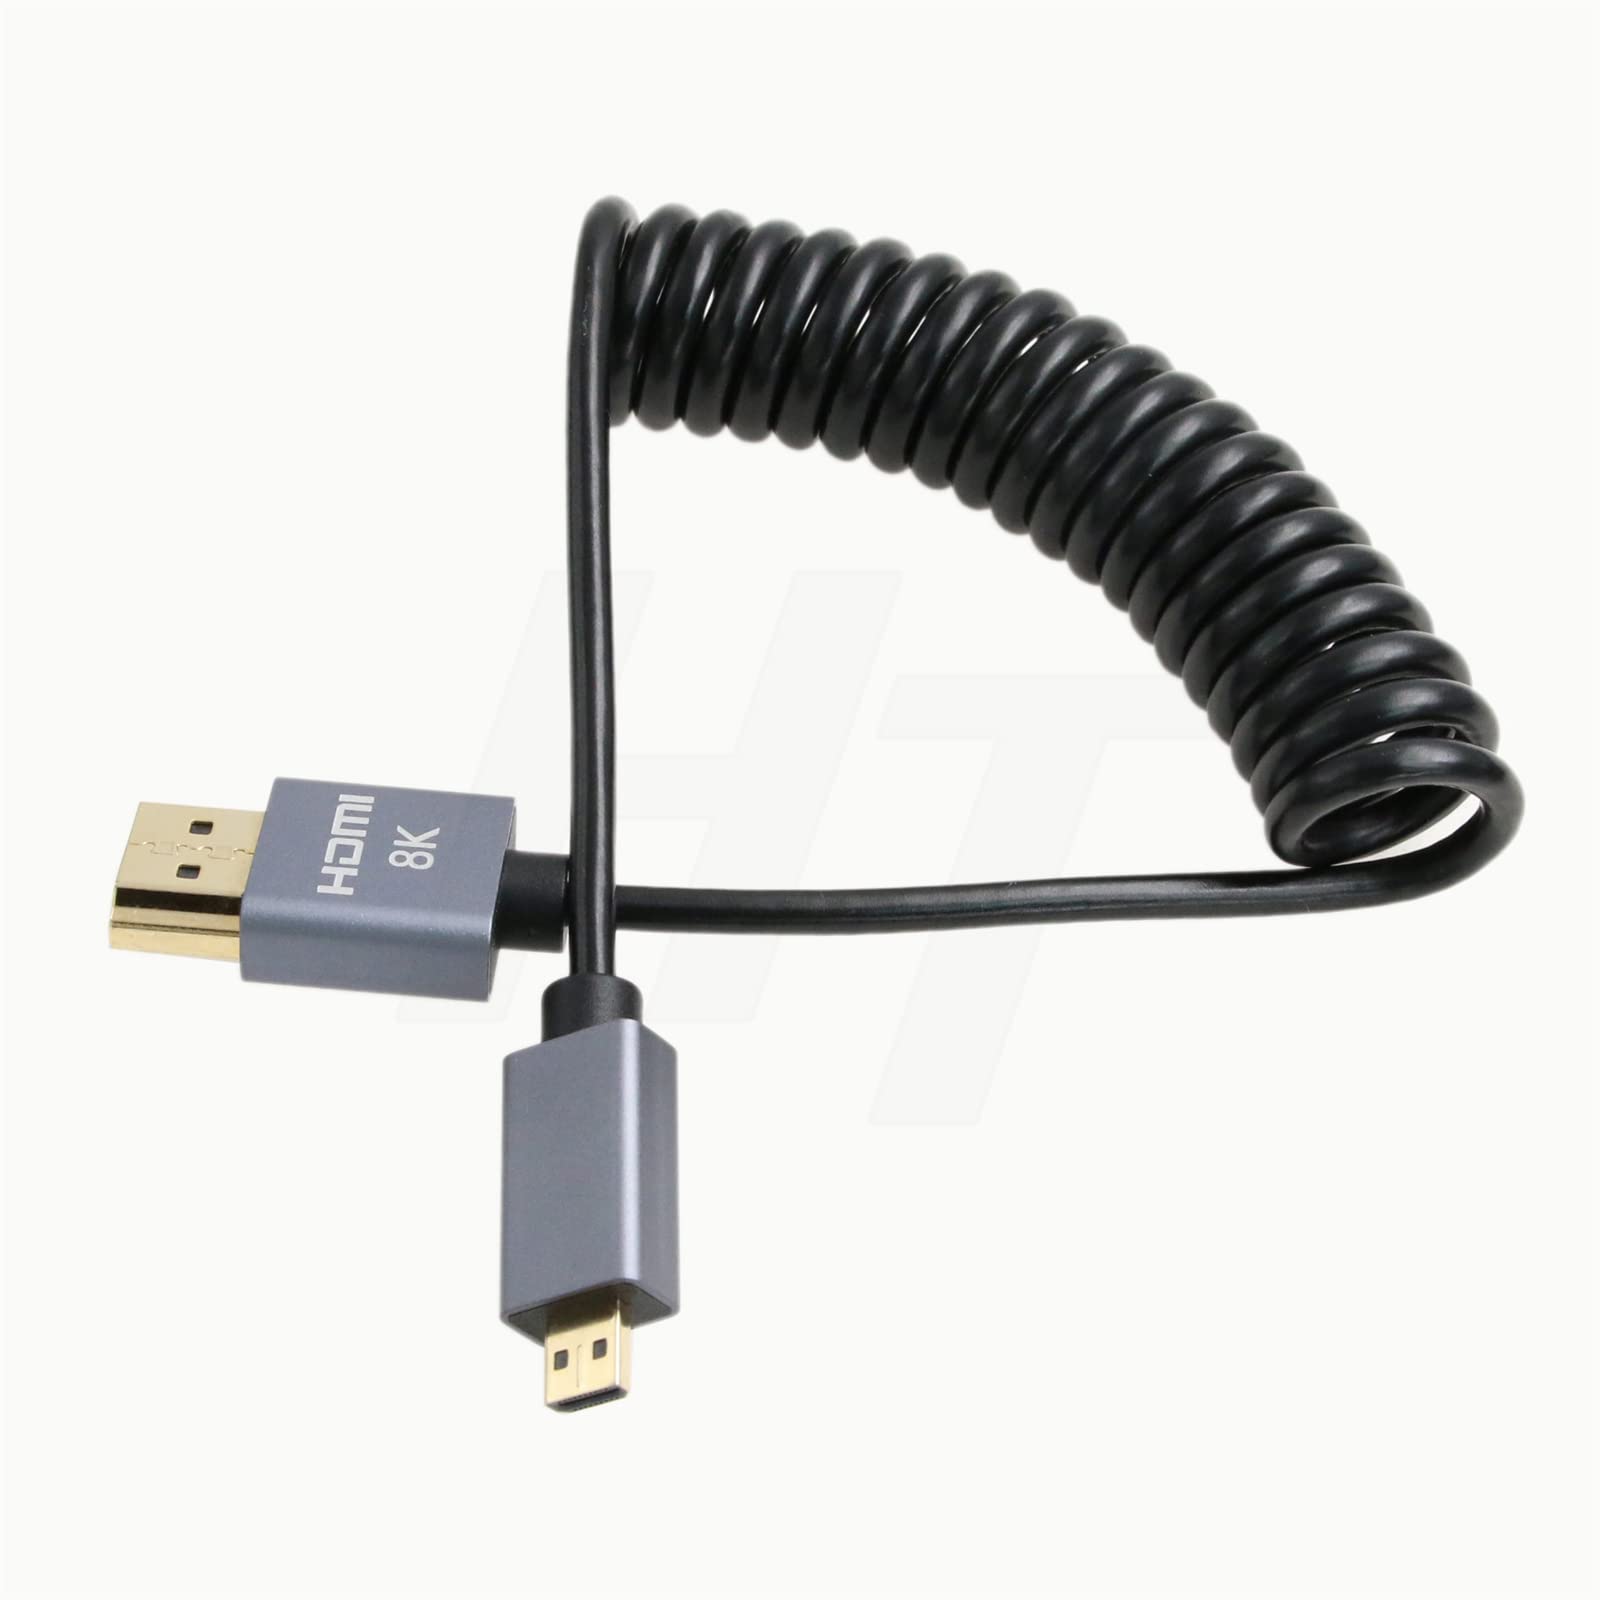 HangTon Micro HDMI to Standard HDMI 4K 8K 60fps Coiled Cable for ATOMOS Ninja V Monitor Sony A6400 A7s Canon EOS M R5 R7 GH4 X-T4 Z50 Camera Type A D HDMI 2.1 30cm